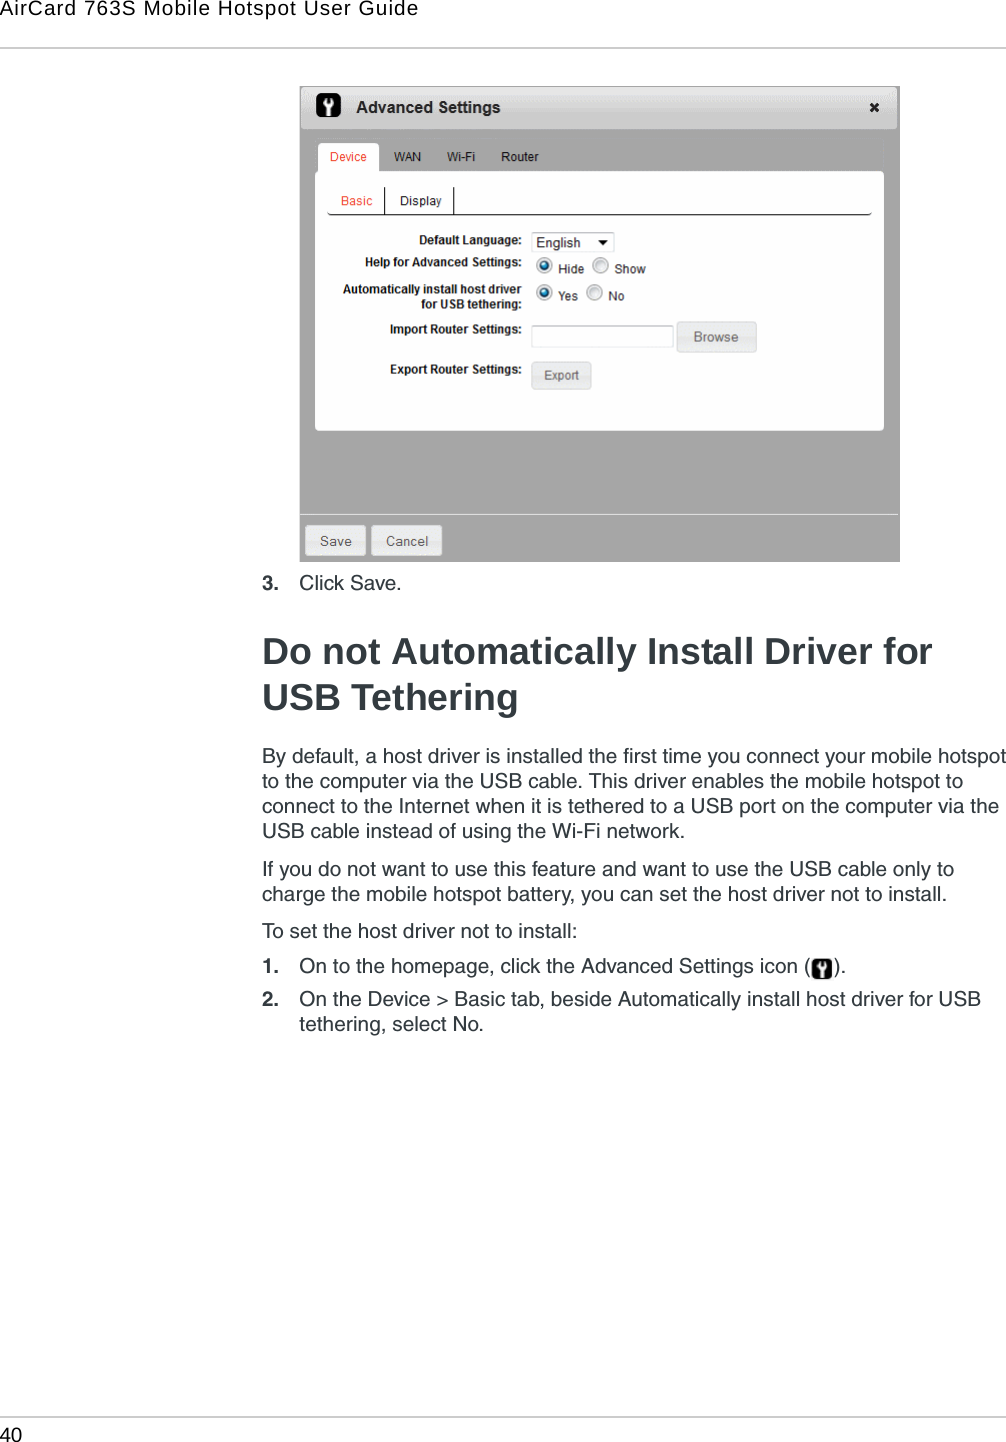 AirCard 763S Mobile Hotspot User Guide40  3. Click Save. Do not Automatically Install Driver for USB TetheringBy default, a host driver is installed the first time you connect your mobile hotspot to the computer via the USB cable. This driver enables the mobile hotspot to connect to the Internet when it is tethered to a USB port on the computer via the USB cable instead of using the Wi-Fi network. If you do not want to use this feature and want to use the USB cable only to charge the mobile hotspot battery, you can set the host driver not to install. To set the host driver not to install:1. On to the homepage, click the Advanced Settings icon ( ).2. On the Device &gt; Basic tab, beside Automatically install host driver for USB tethering, select No. 